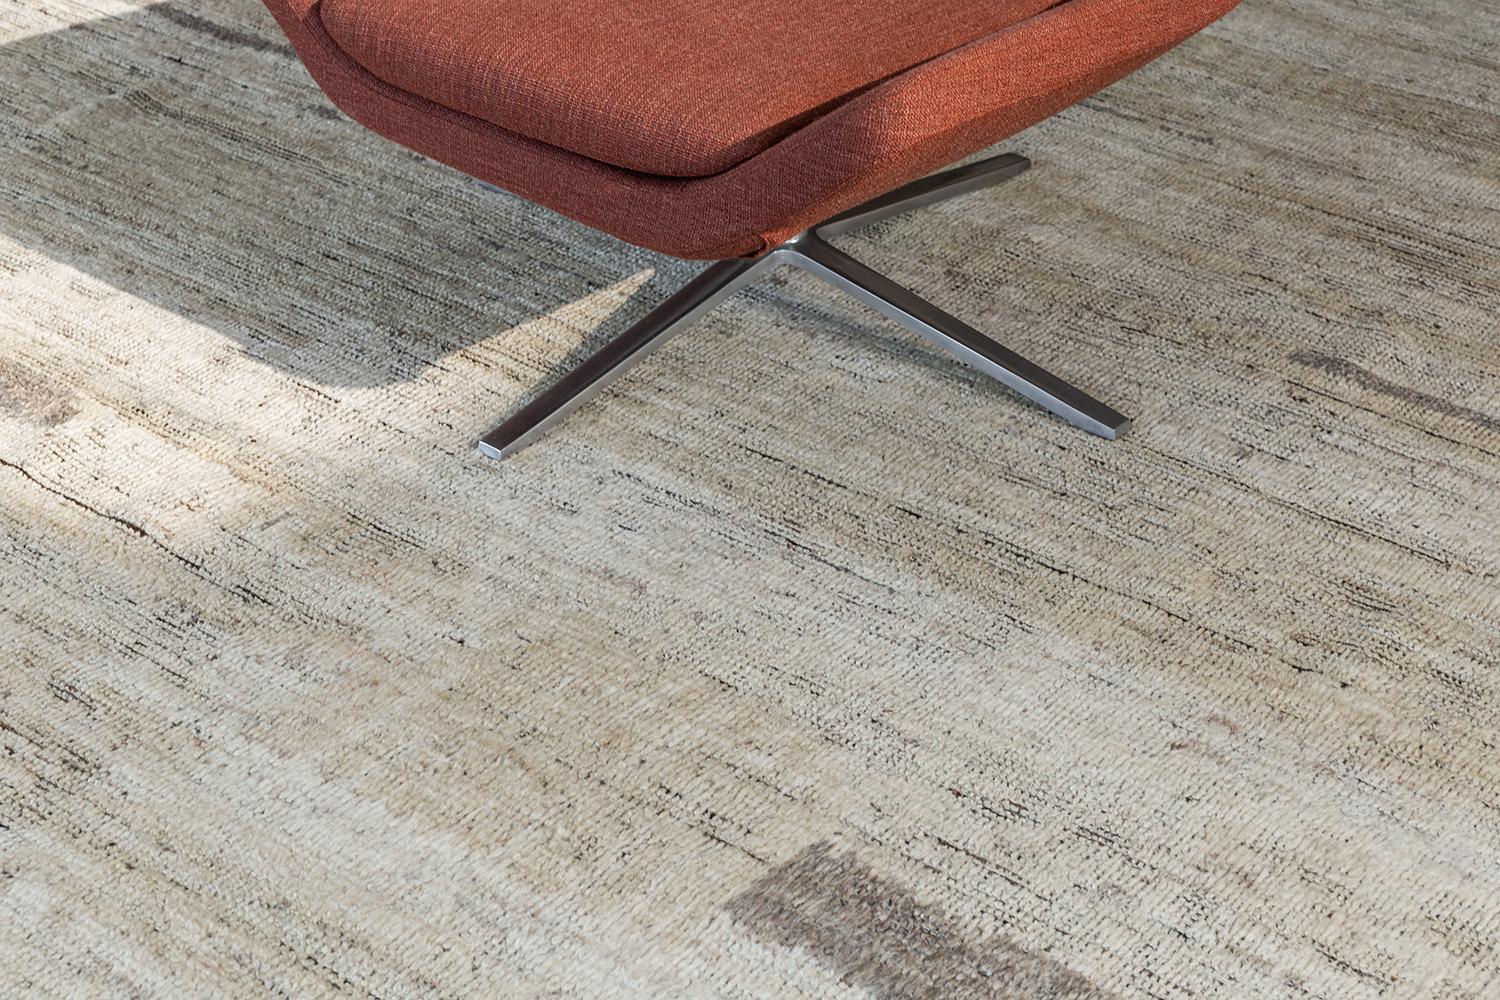 Malaren' is a luxurious wool rug with timeless embossed detailing. In addition to its perfect natural flat weave, Malaren has neutral tone shags that brings a lustrous texture and contemporary feel to one's space. With its plush pile, functional